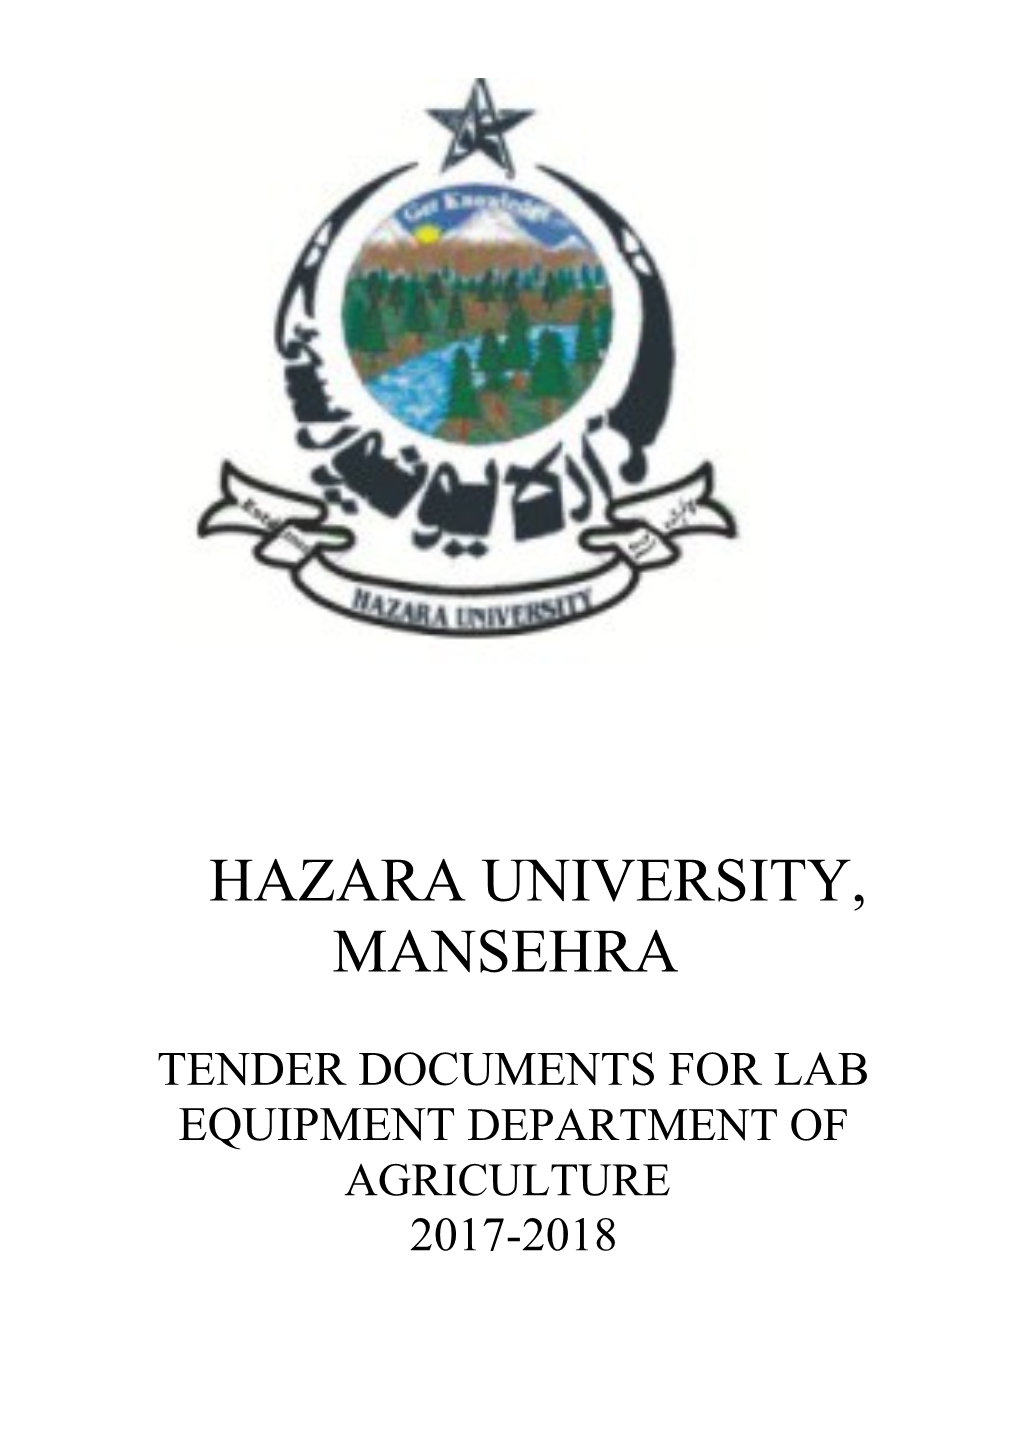 Tender Documents for Lab Equipment Department of Agriculture